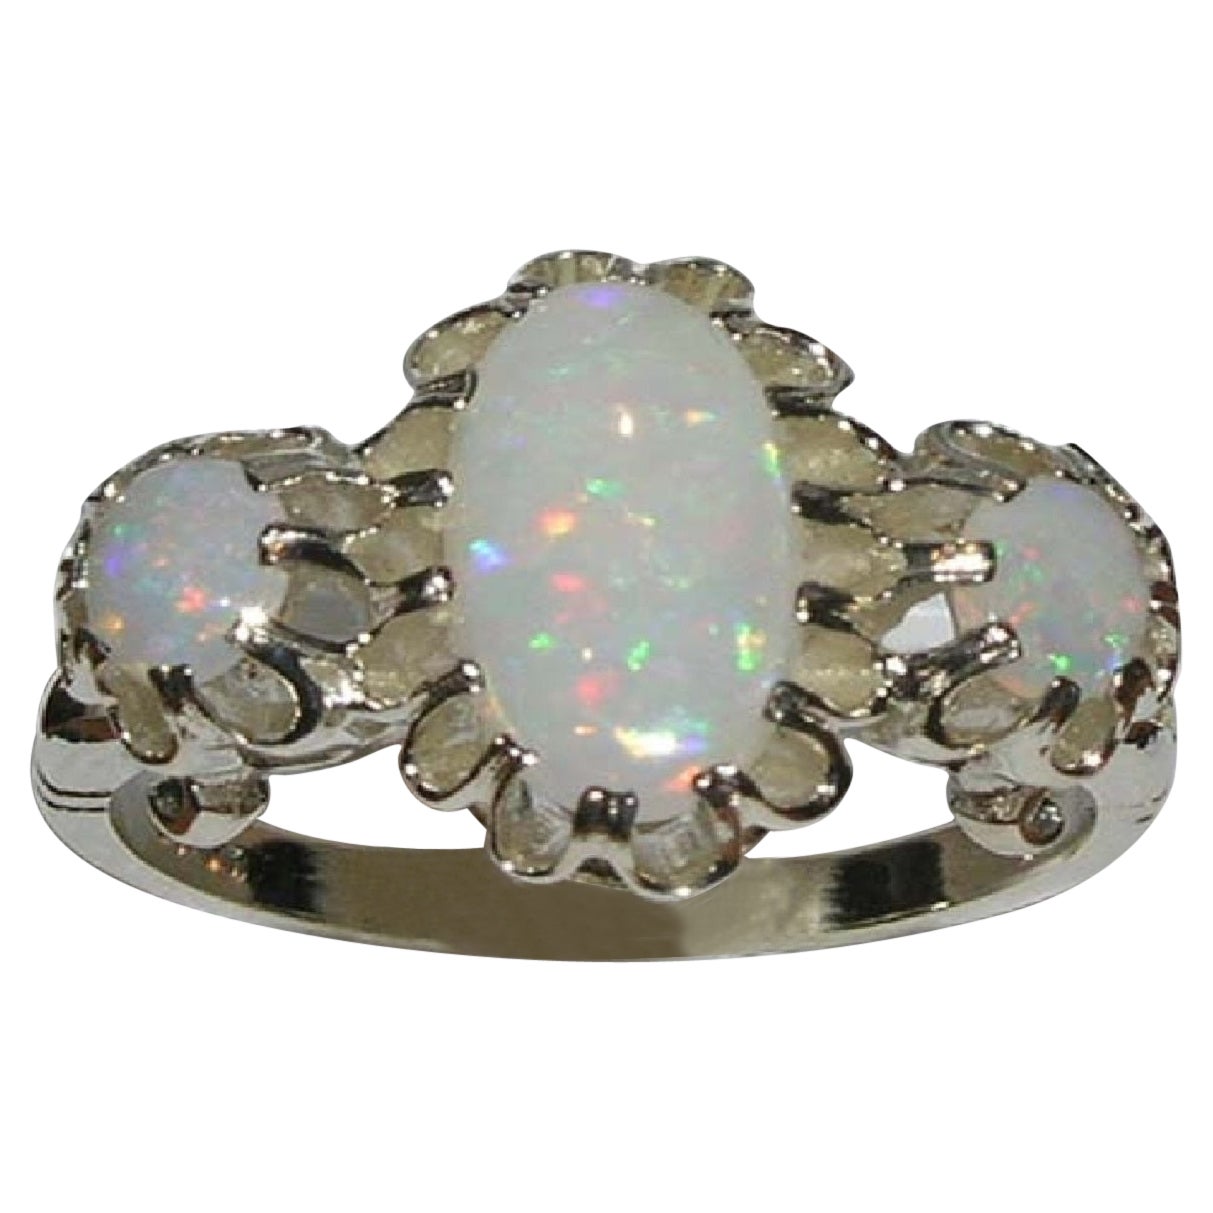 For Sale:  English 9K White Gold Large Elongated Colourful Opal Trilogy Ring